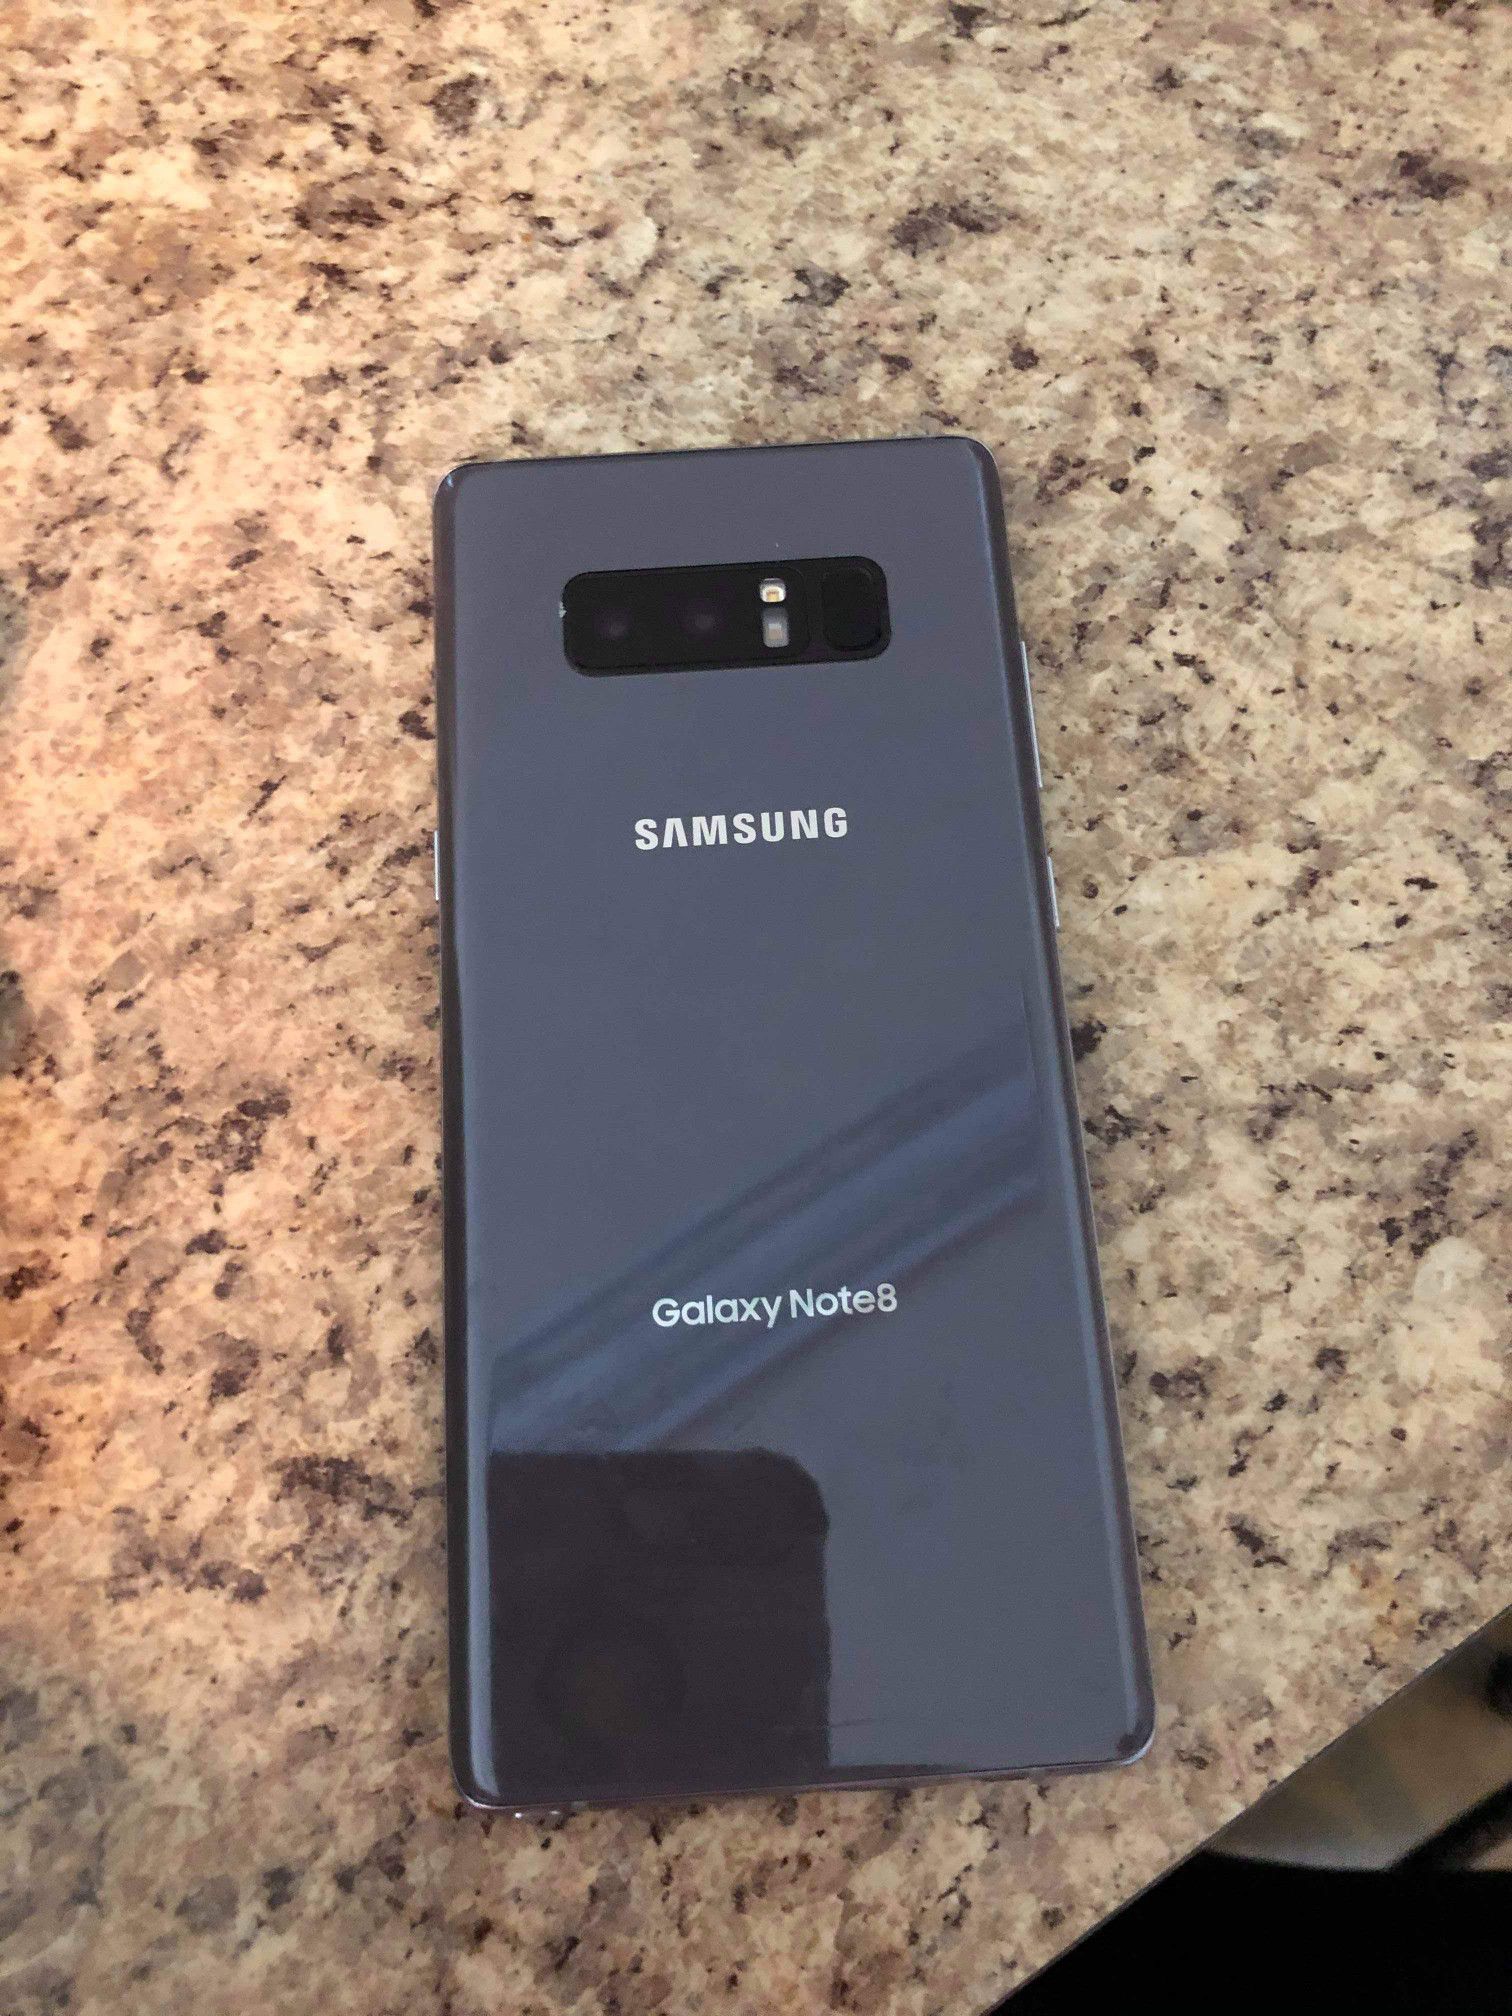 Samsung note 8 WITH cases and screen protectors